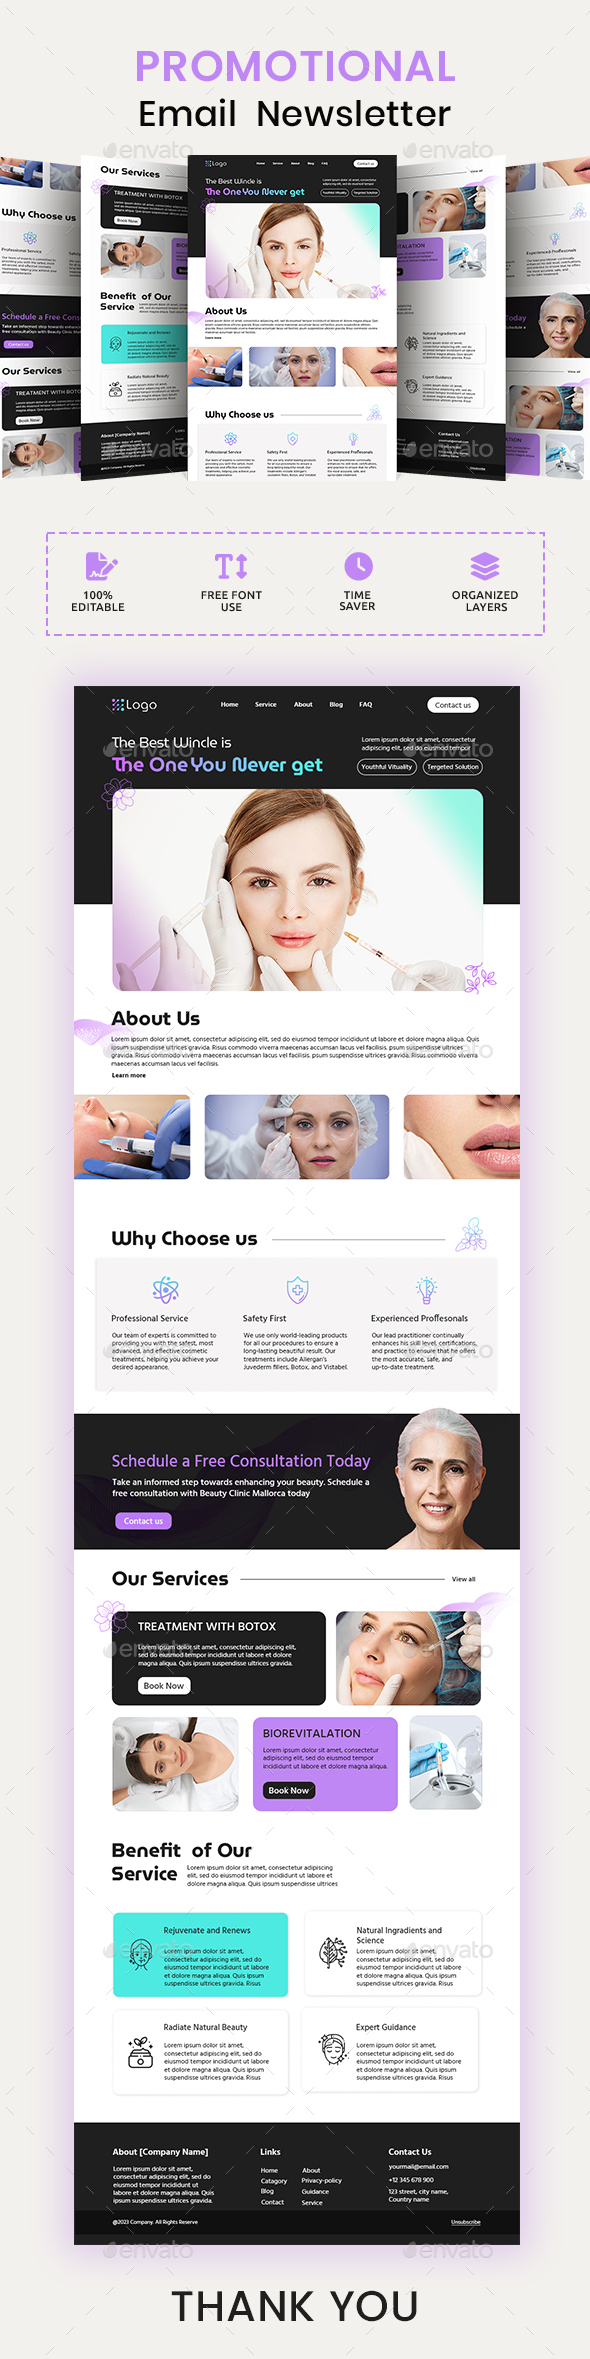 [DOWNLOAD]Laser Treatment Email Newsletter PSD Template